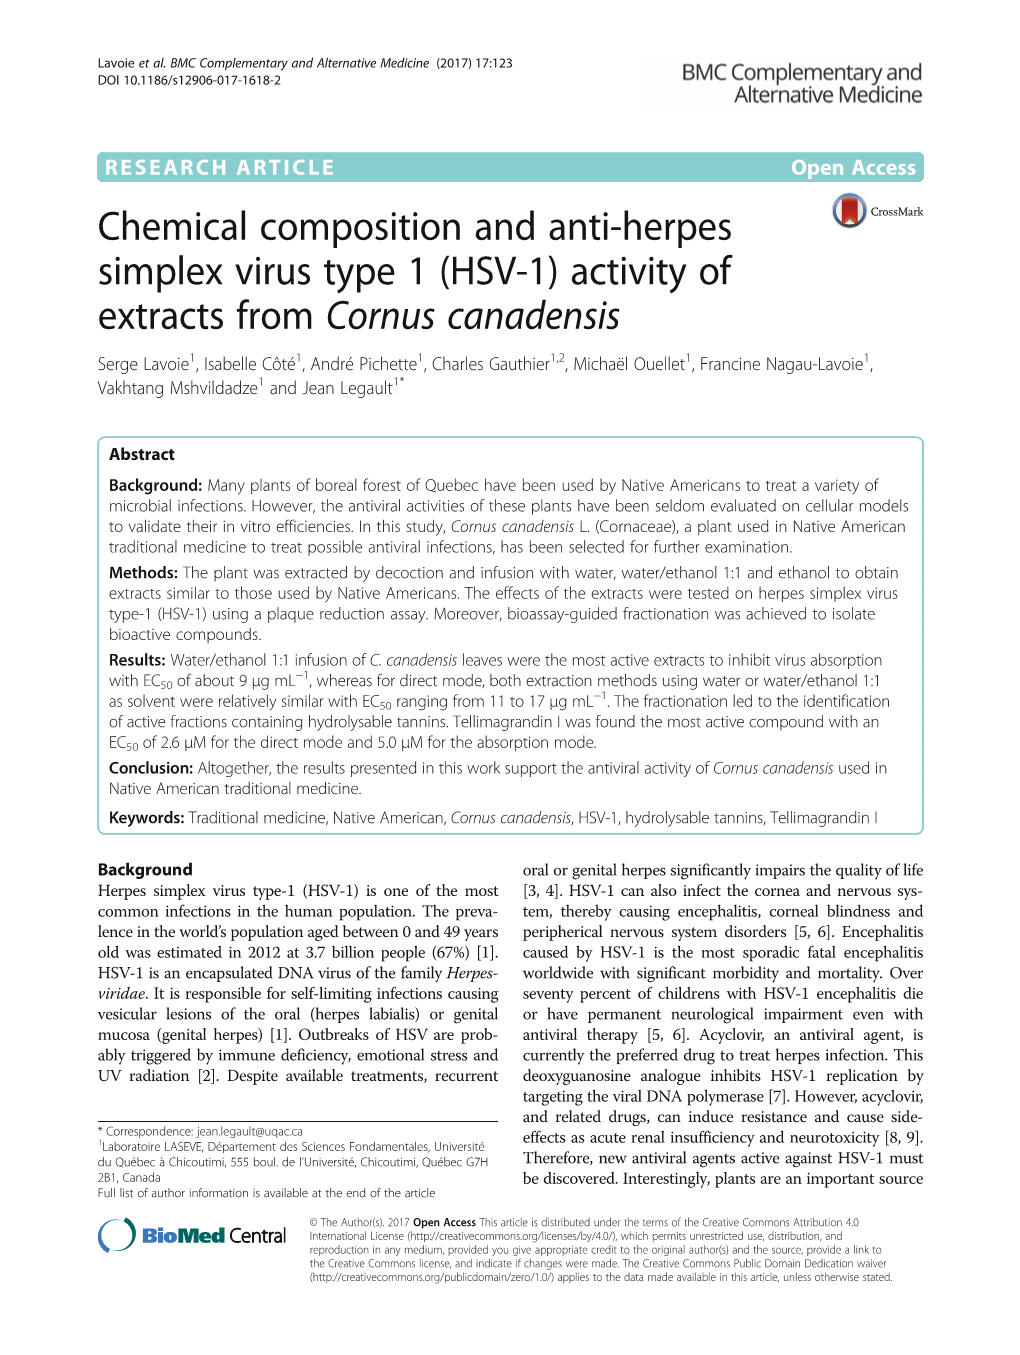 Chemical Composition and Anti-Herpes Simplex Virus Type 1